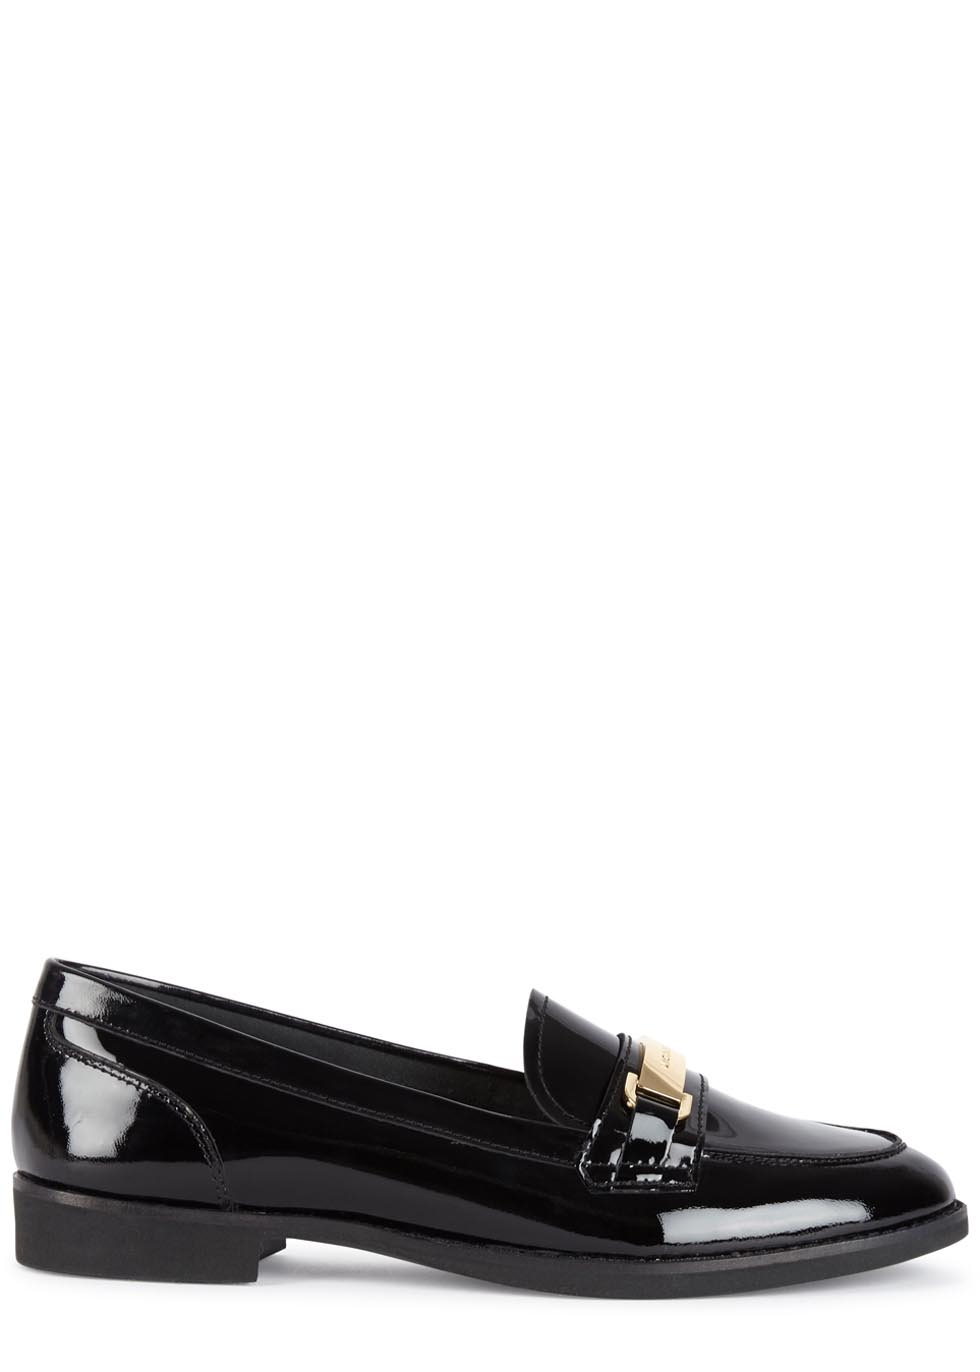 Michael Kors Ansley Black Patent Leather Loafers - Lyst